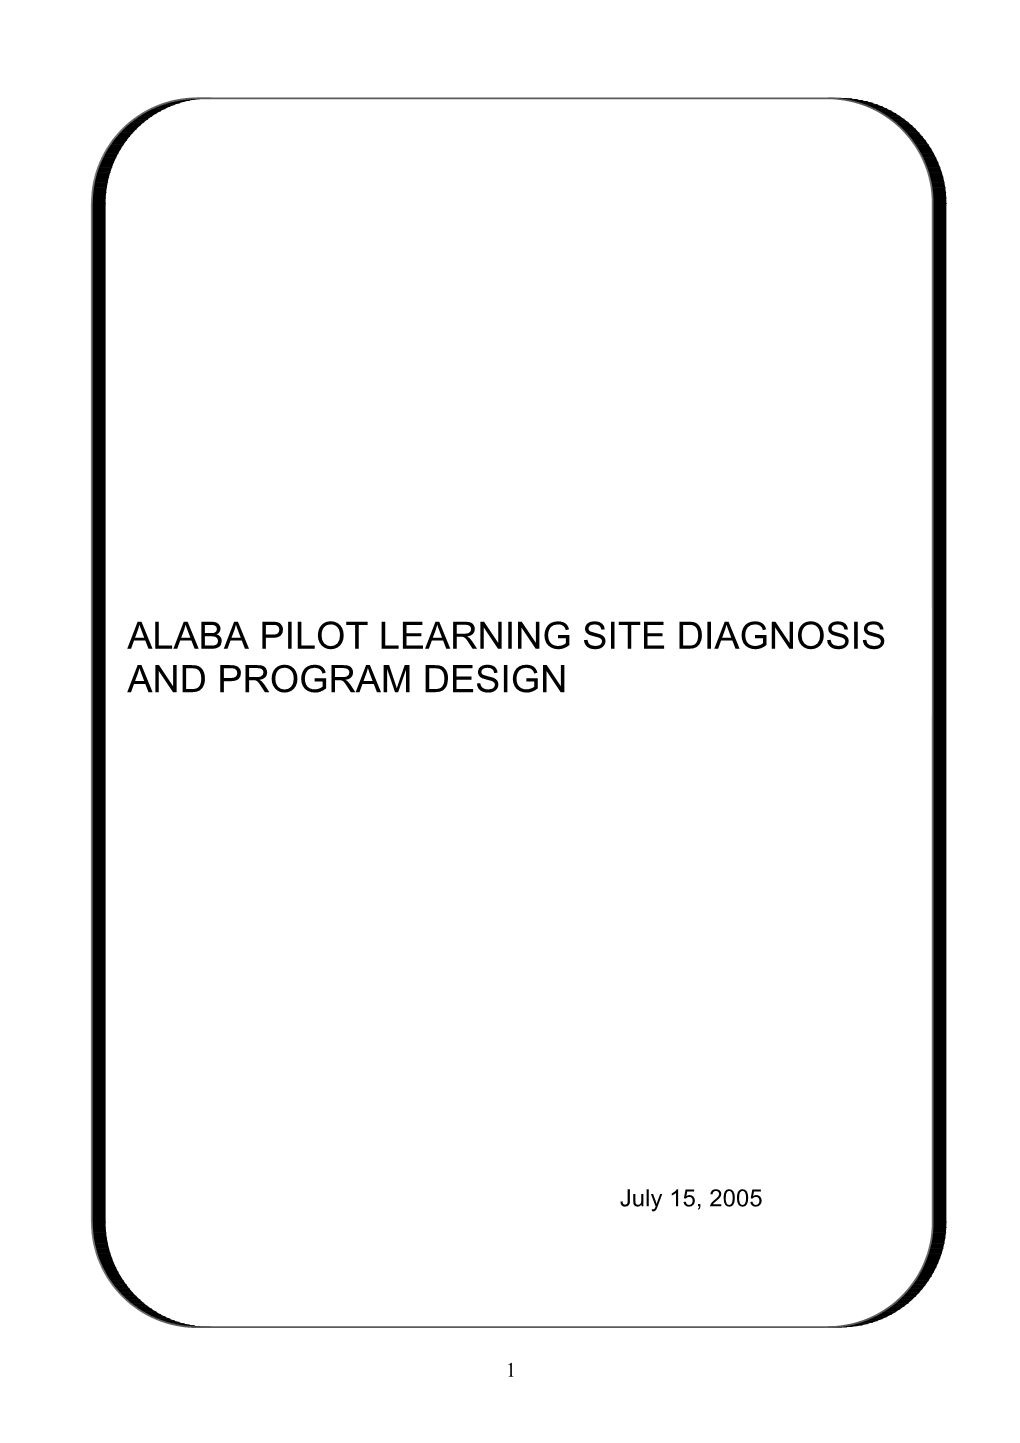 Alaba Pilot Learning Site Diagnosis and Program Design